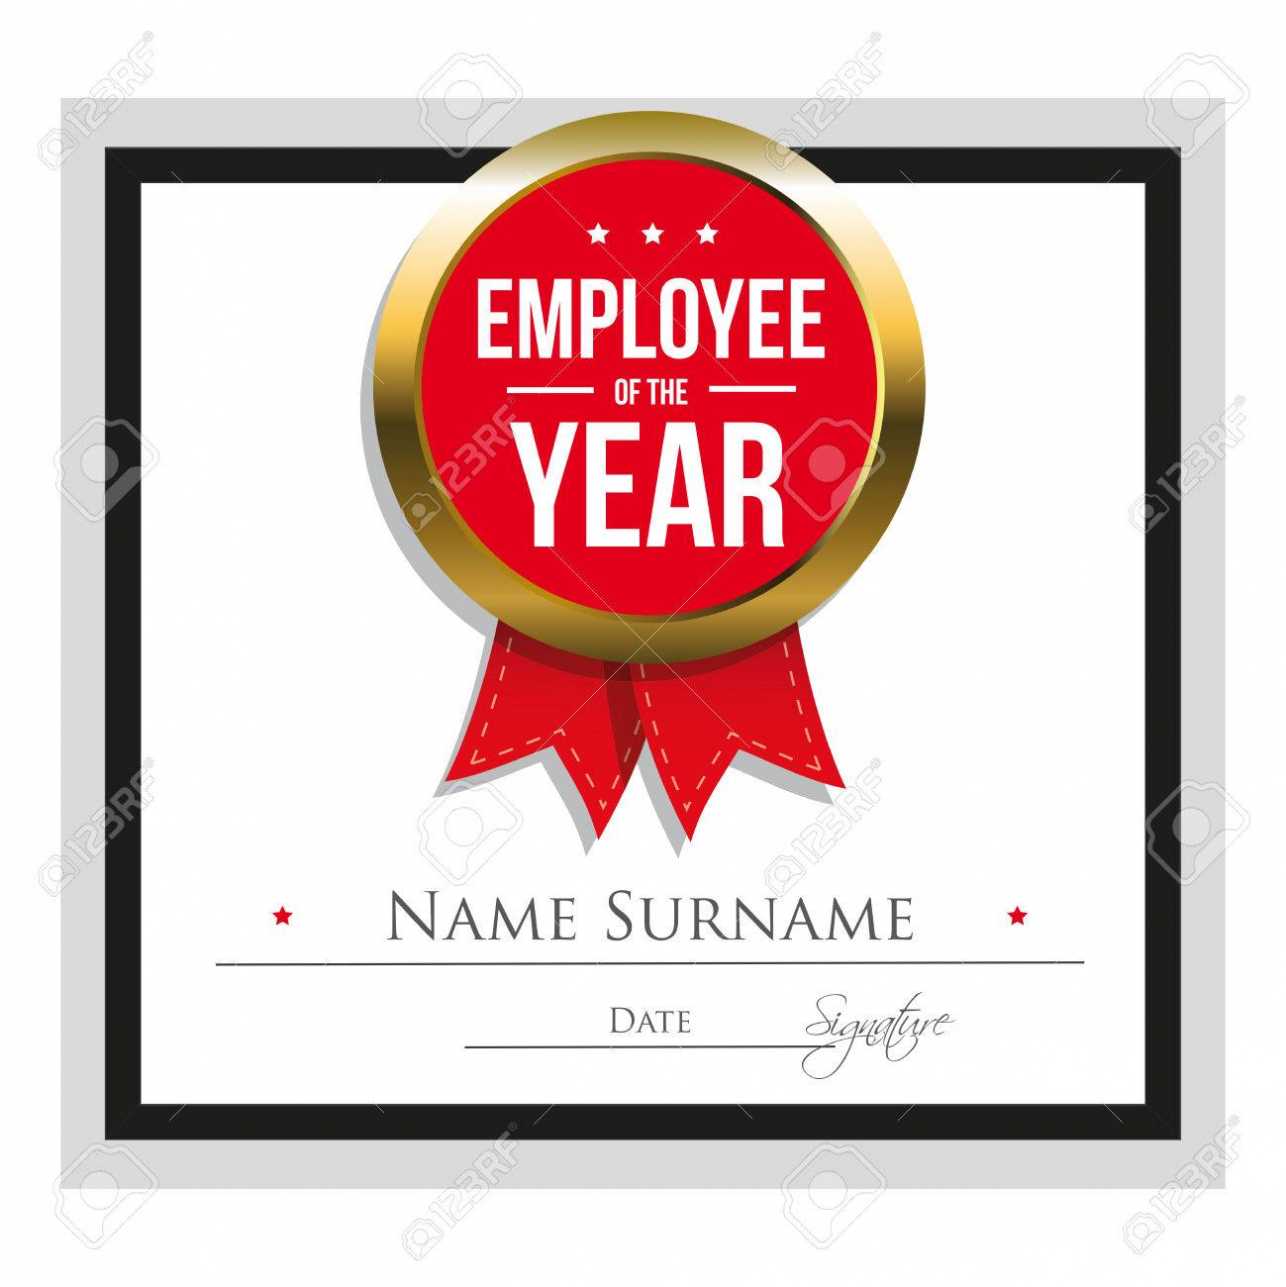 Employee Of The Year Certificate Template Free Great Professional